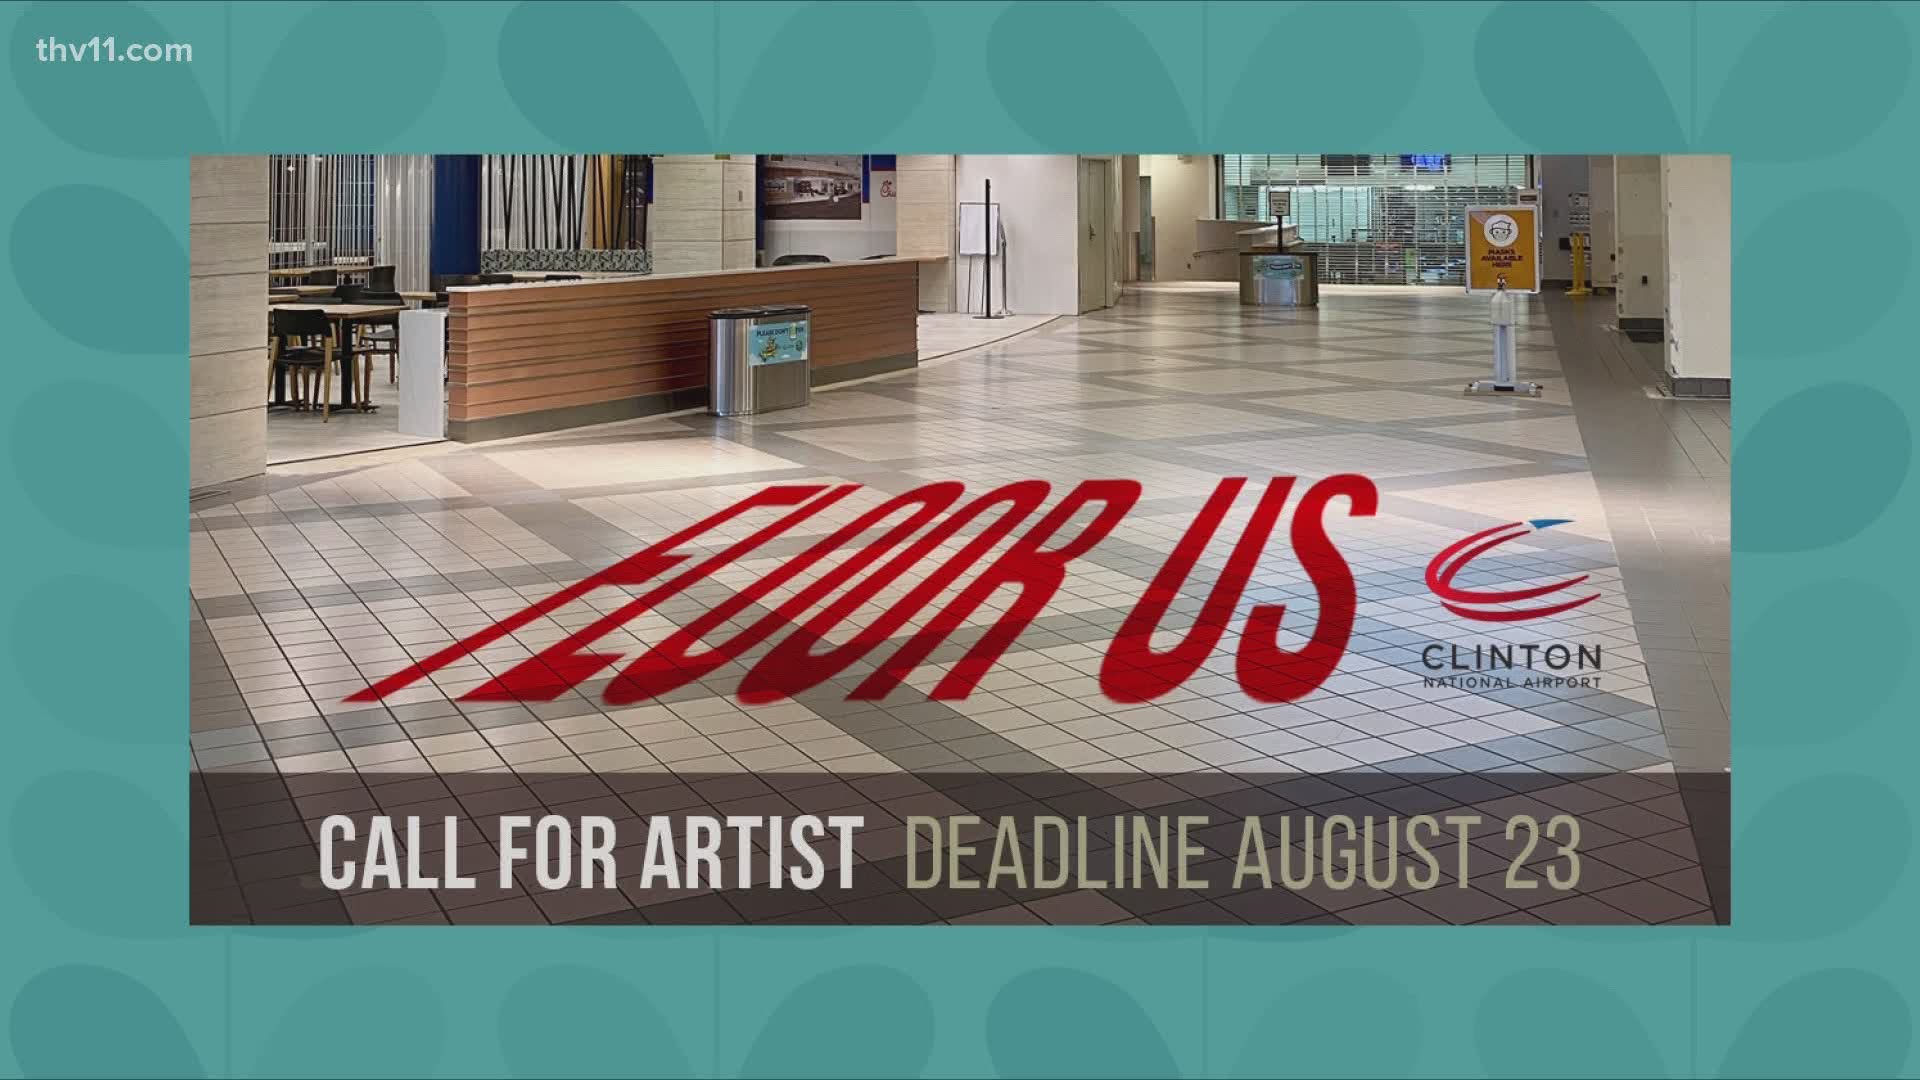 You have until August 23rd to submit your work for the Art in the Airport program. If picked, you get $10,000 and your work will be seen by millions of travelers.